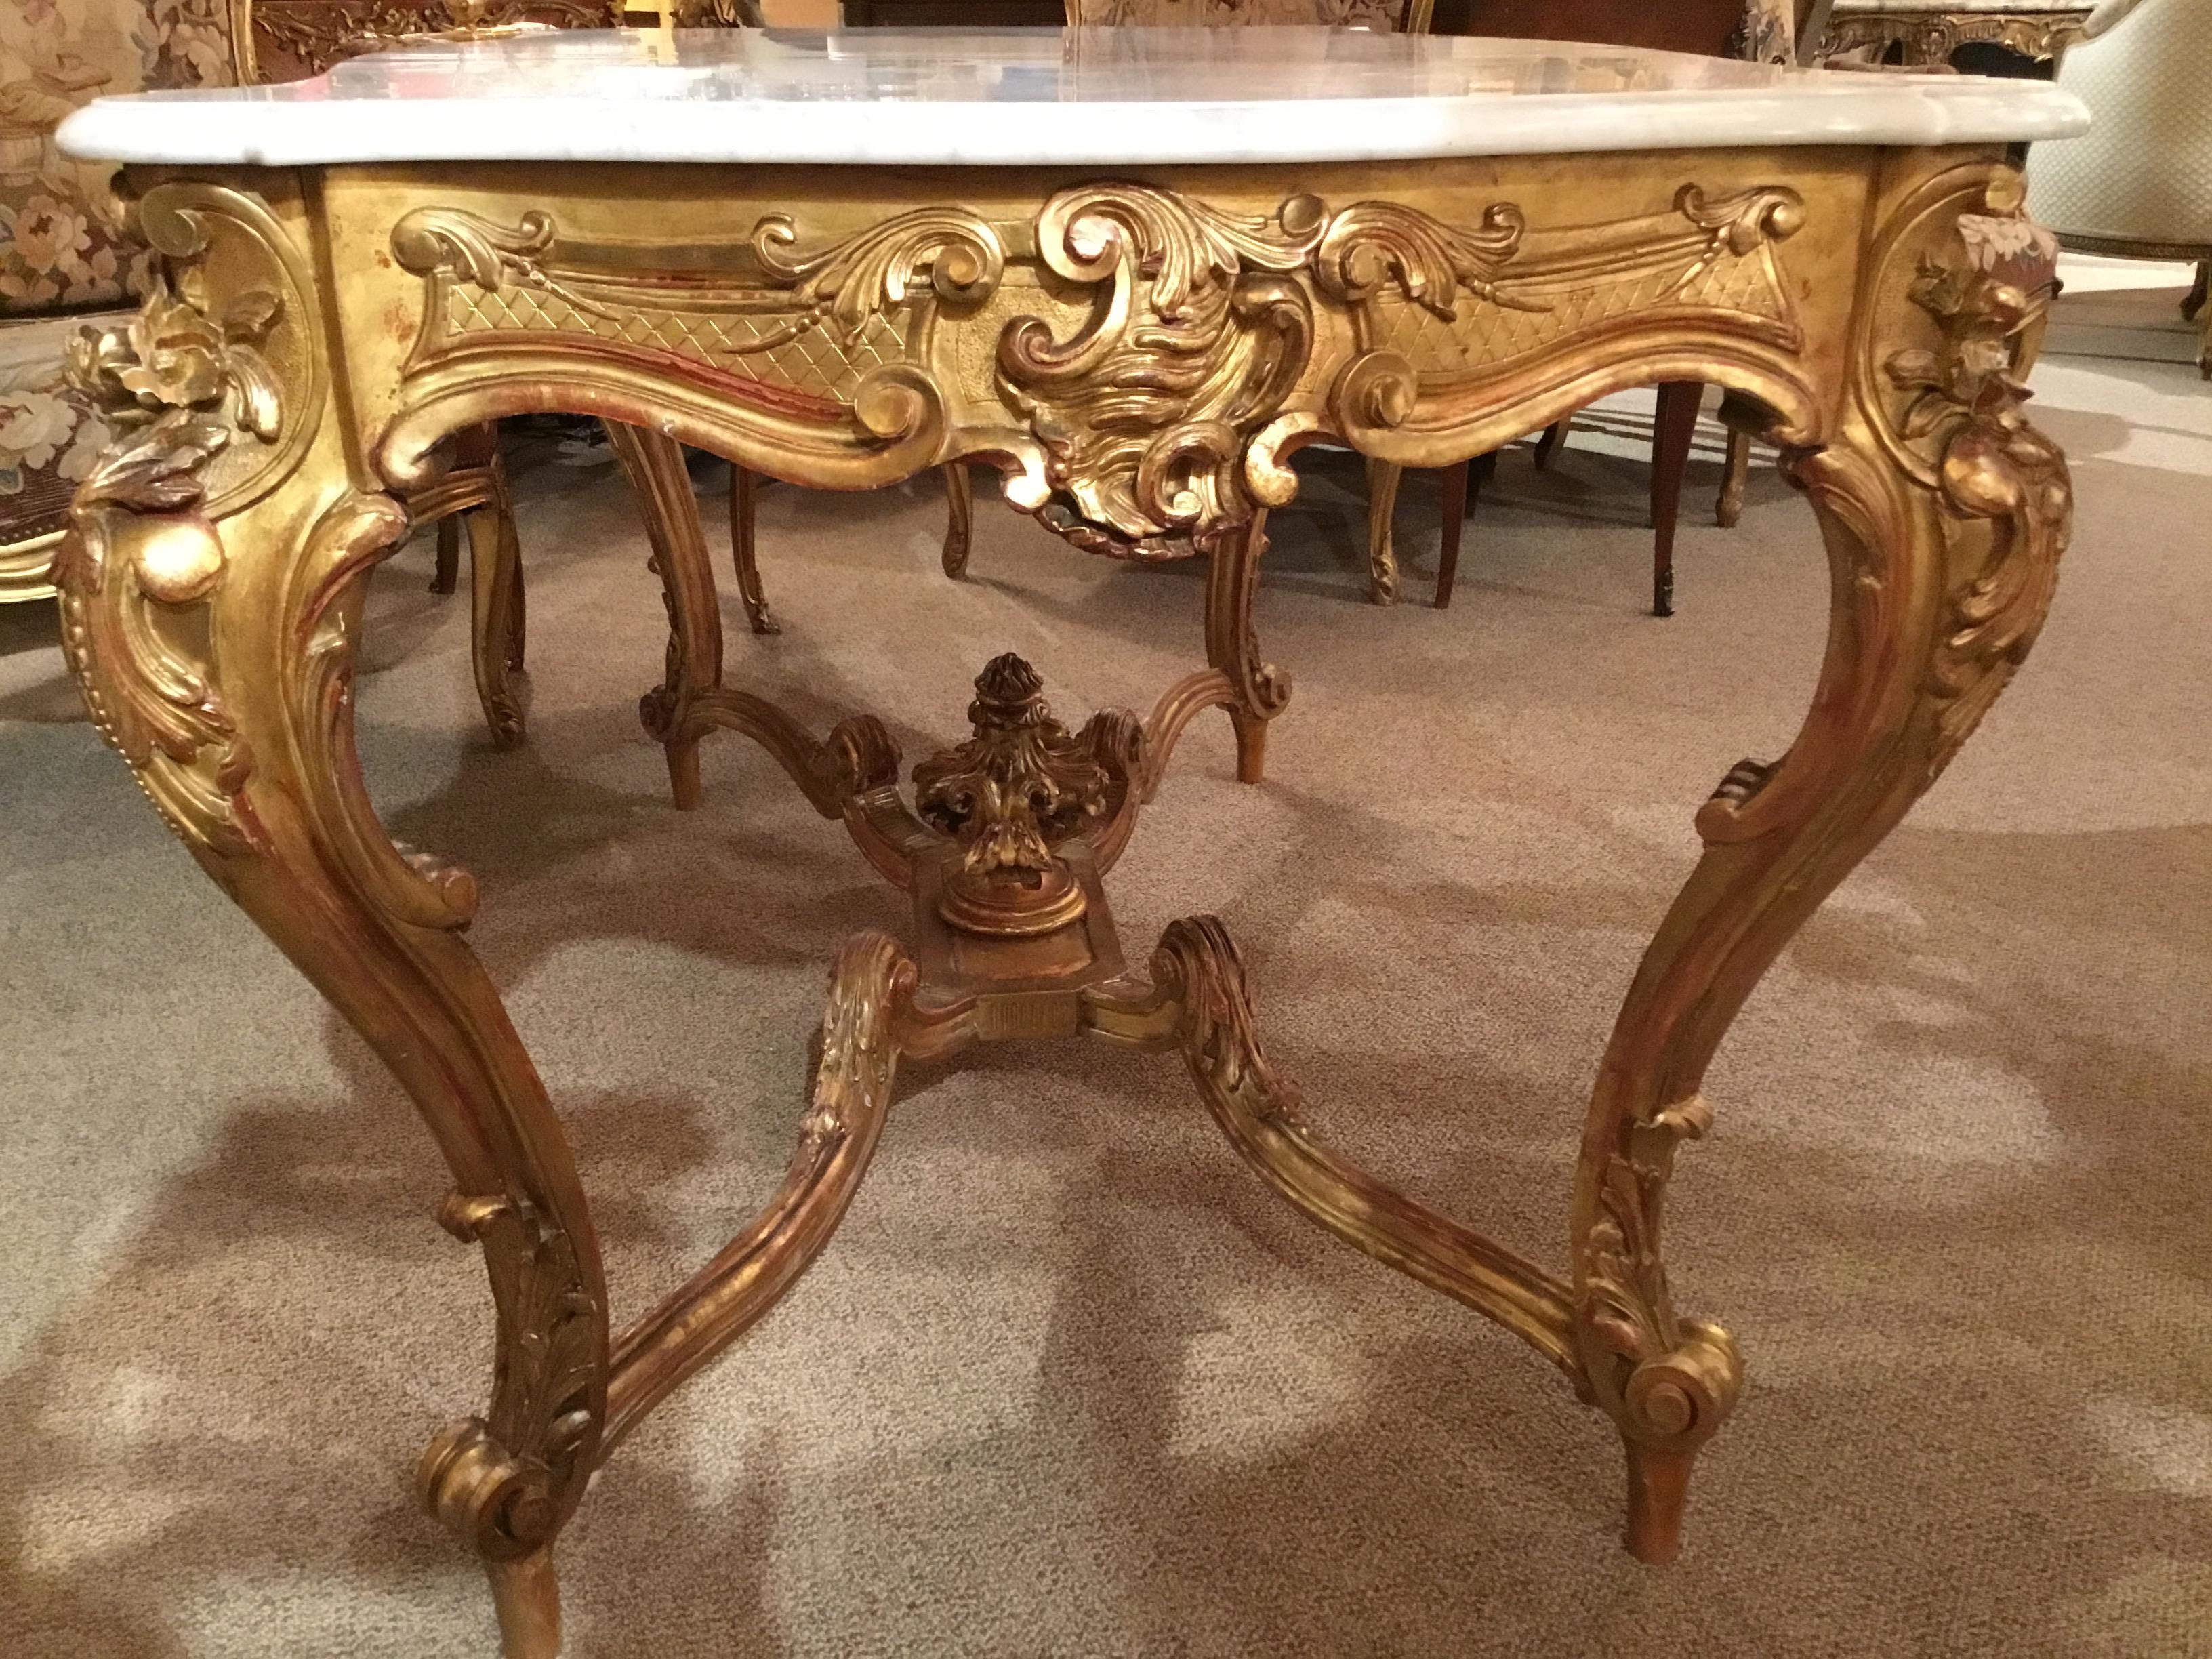 Mid-19th century giltwood center table, has a shaped rectangular white marble-top. The marble top is in pristine condition,
With a molded edge, above a conforming frieze centered by a central cartouche  design issuing foliate garlands to either